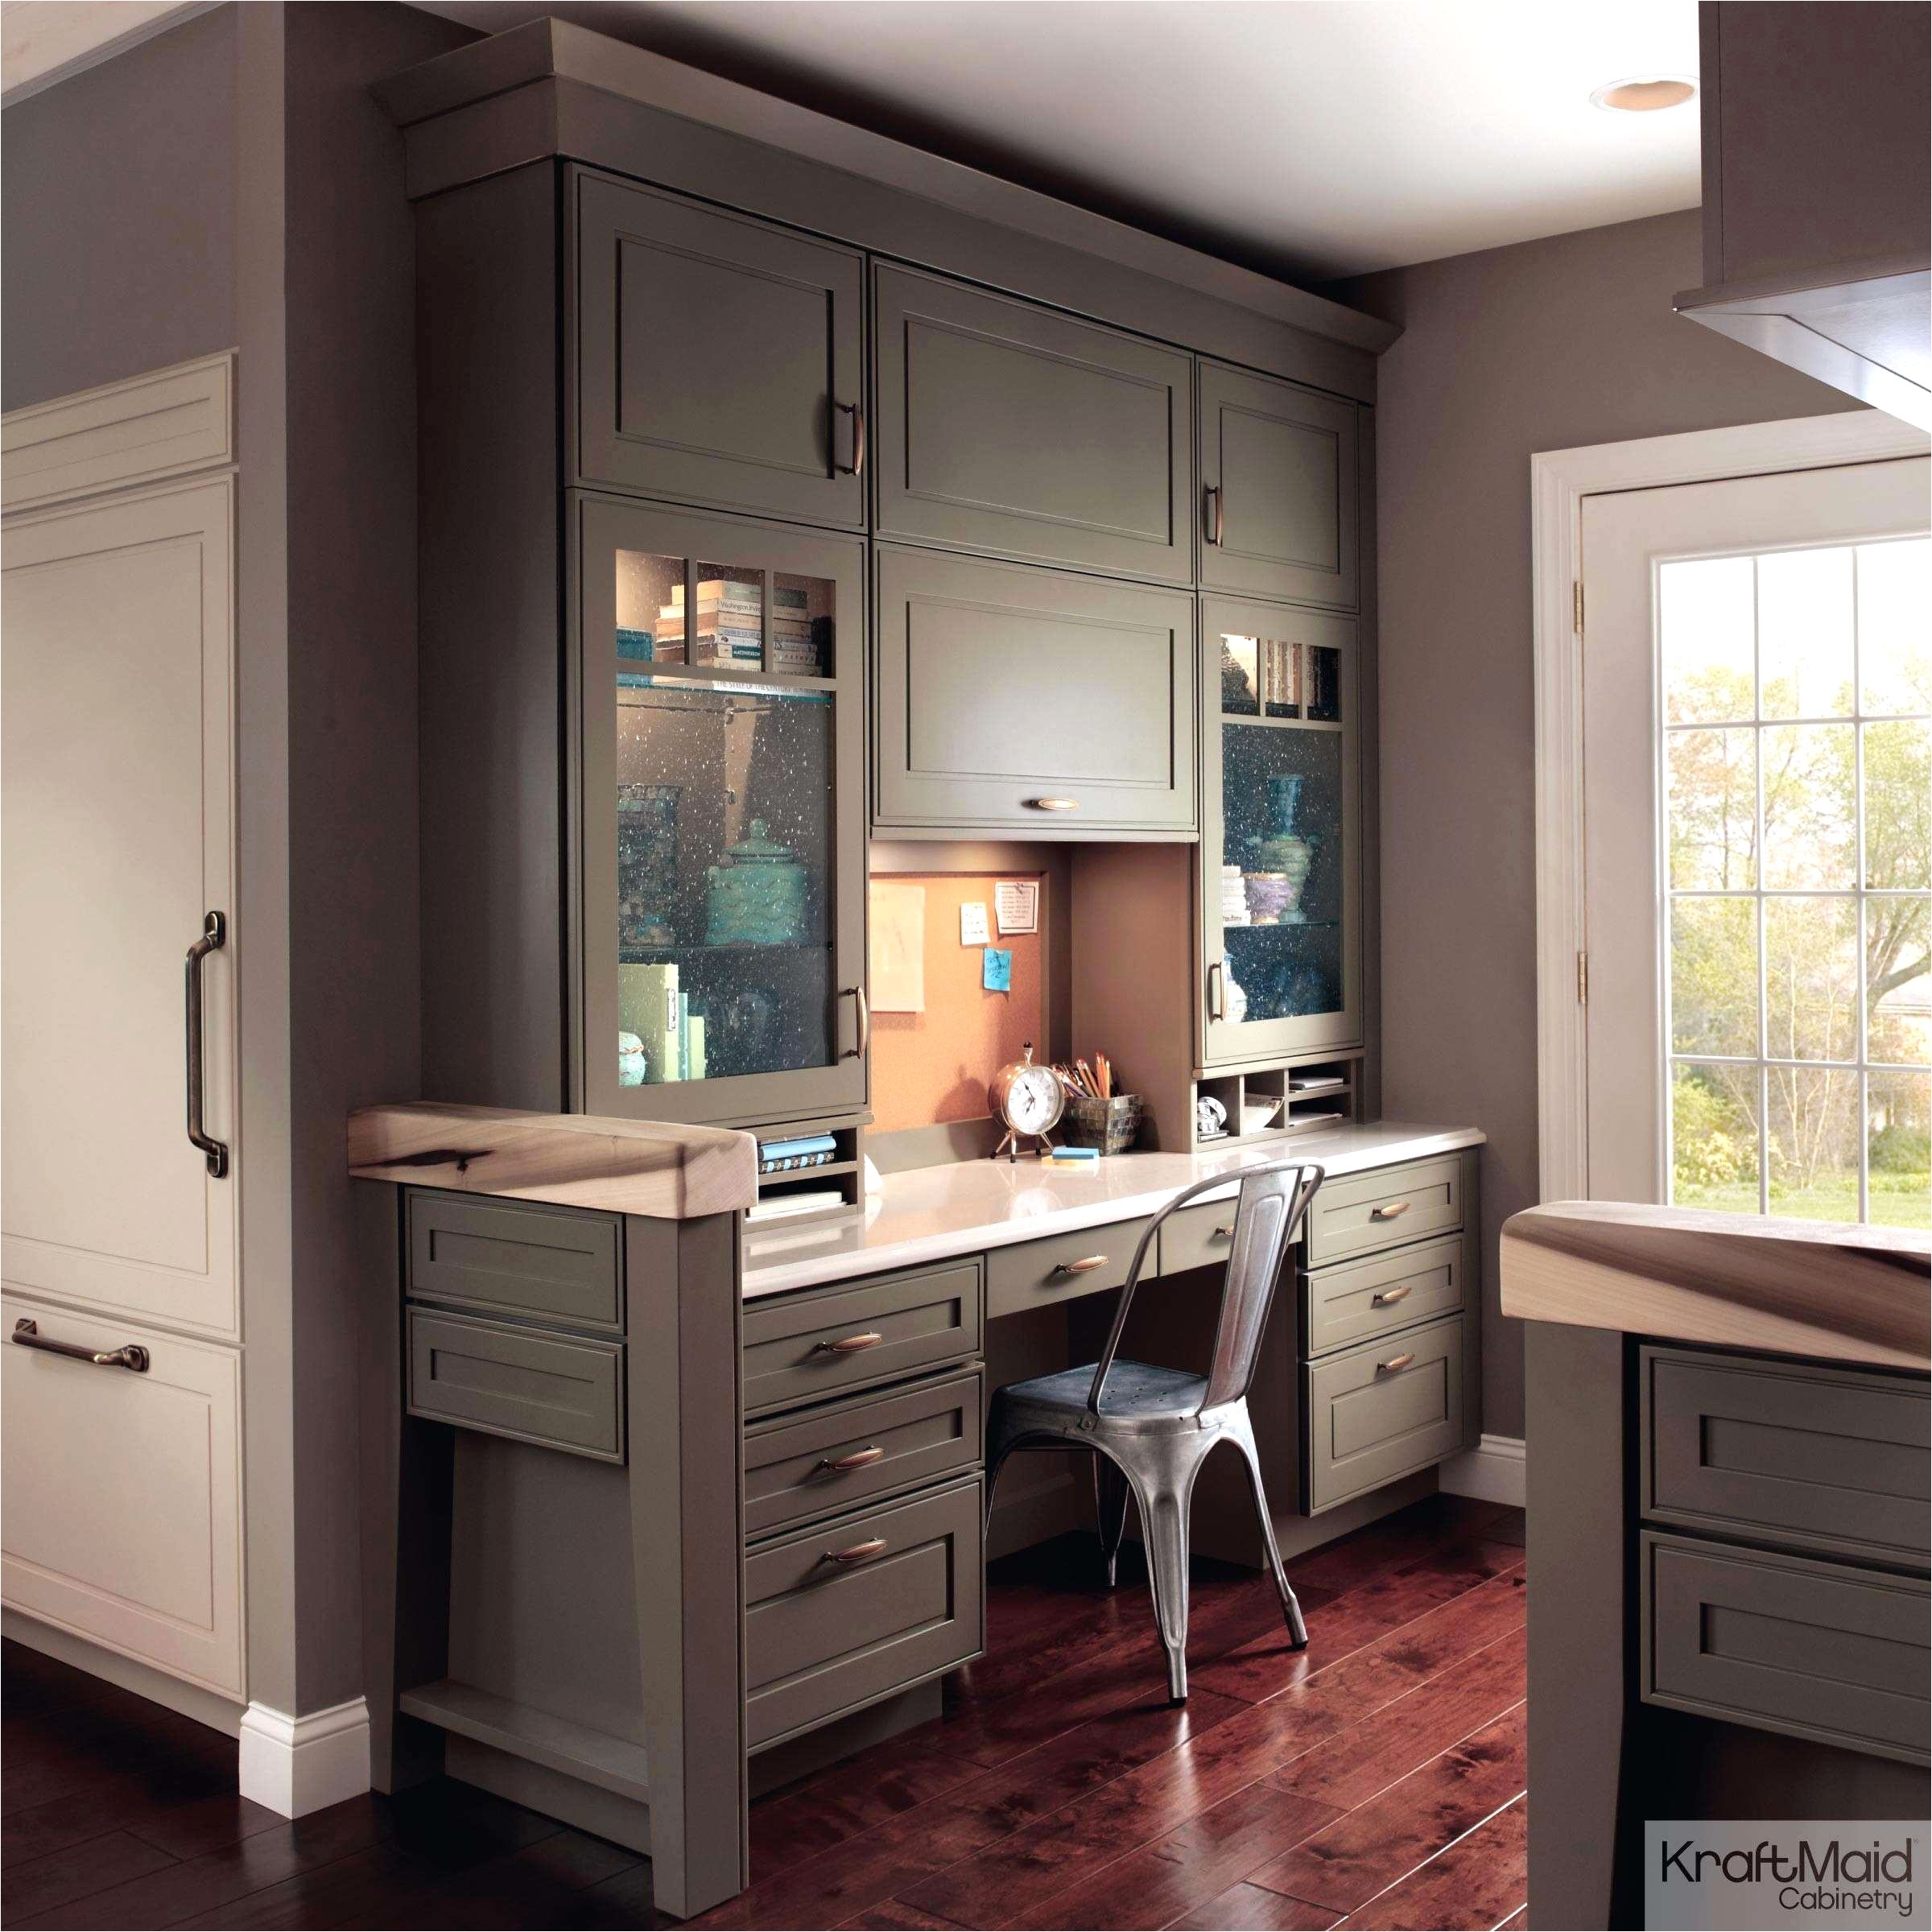 Pickled Maple Kitchen Cabinets Awesome Kitchen Cabinet 0d Kitchen Fresh Painting Kitchen Cabinets